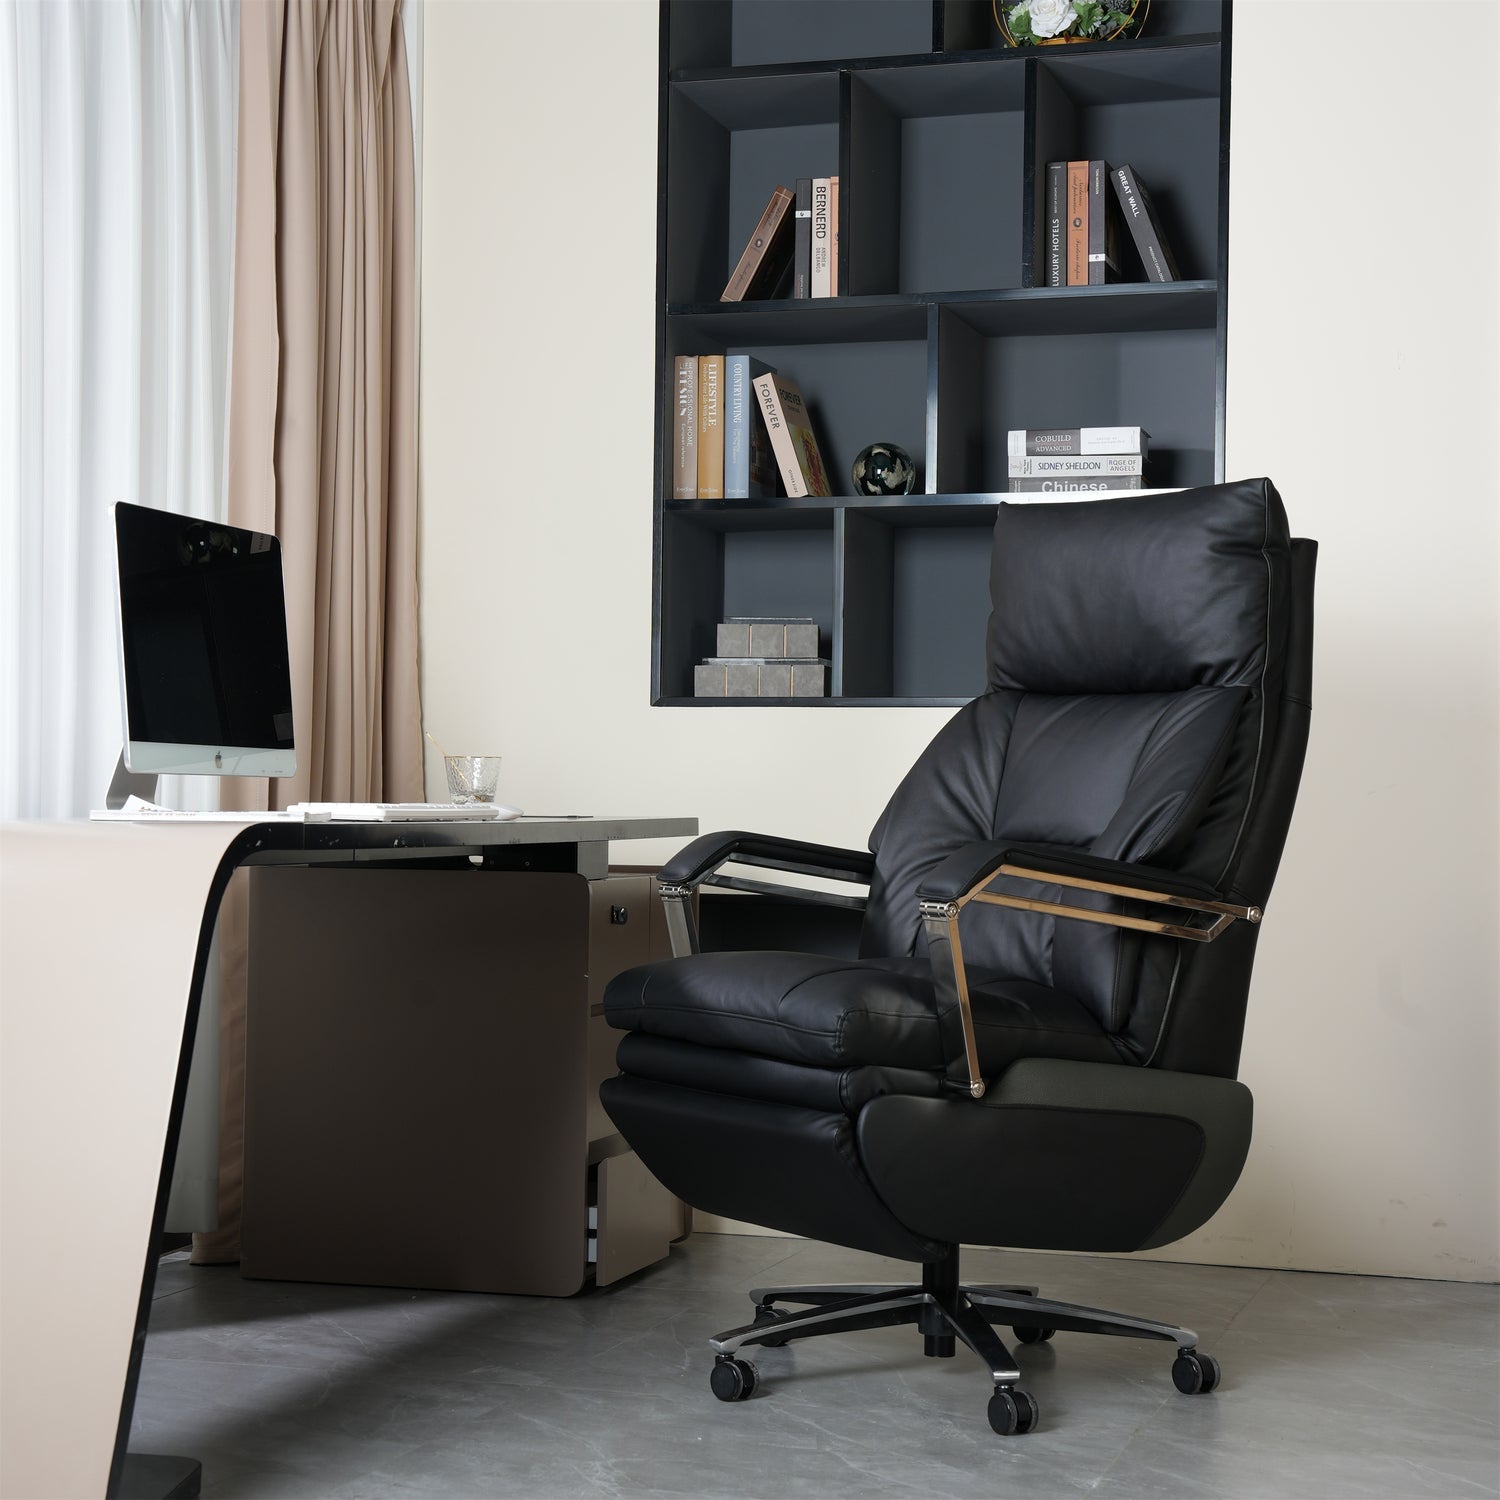 Adjustable Electric Office Chair placed in front of an office desk in an office room 